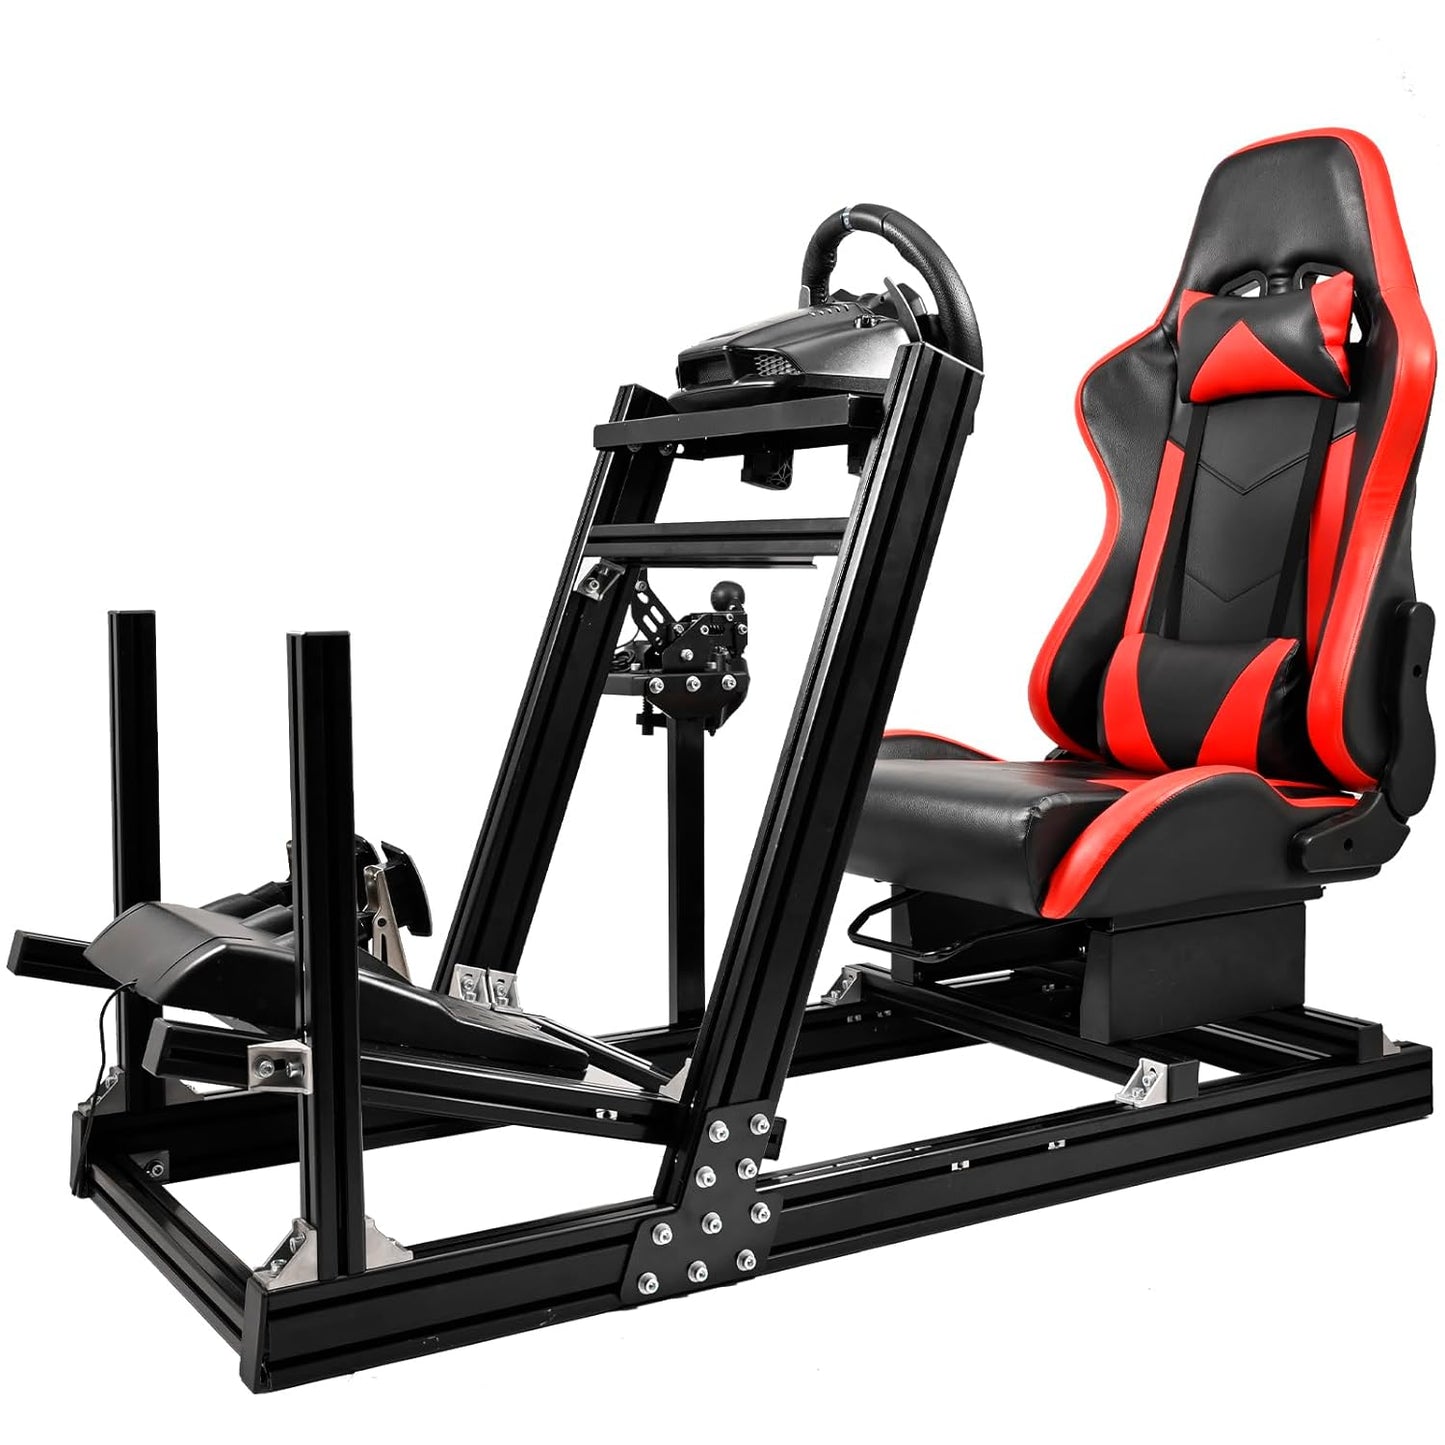 Dardoo F1 Racing Simulator Cockpit with Seat, Profile 40 x 80 mm Wheel Cage with Shifter Lever Stand Fits For Logitech G920 & G923, Xbox,Thrustmaster T300Rs,Without Steering Wheel, Pedal,Handbrake